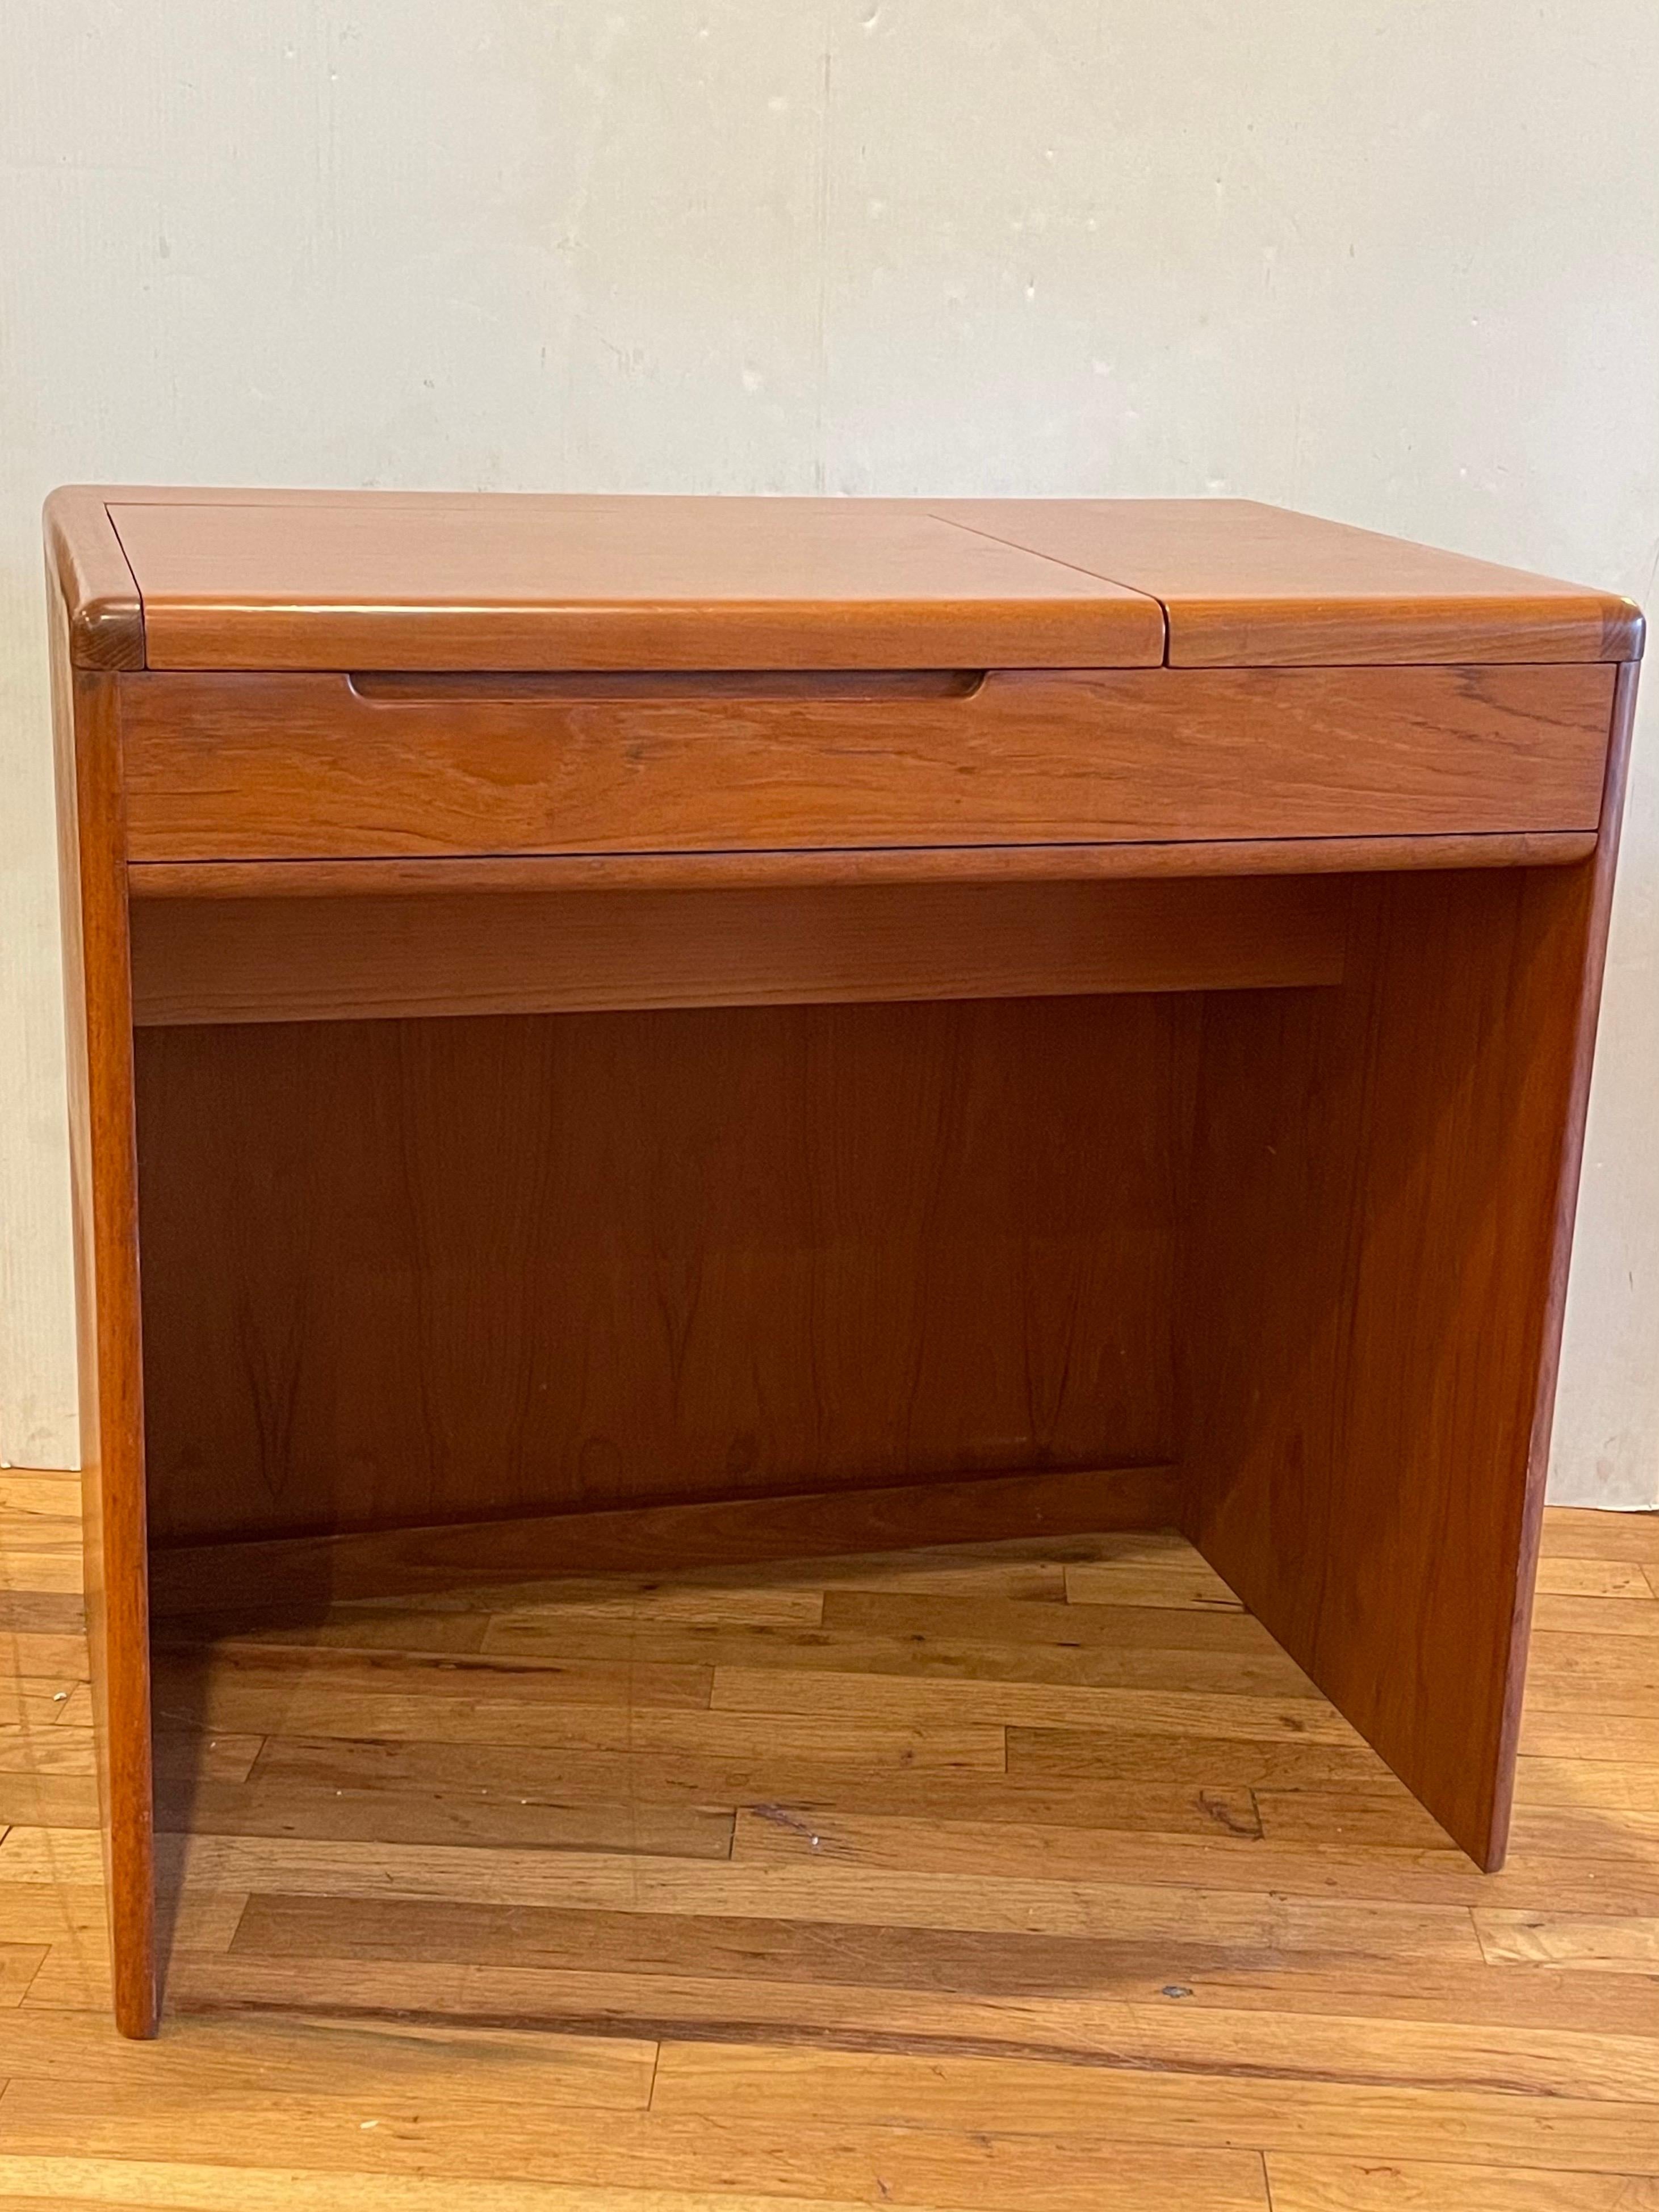 Simple elegant and versatile small desk/vanity, circa 1980s in original teak finish and condition very clean, with mirror and removable box drawer.